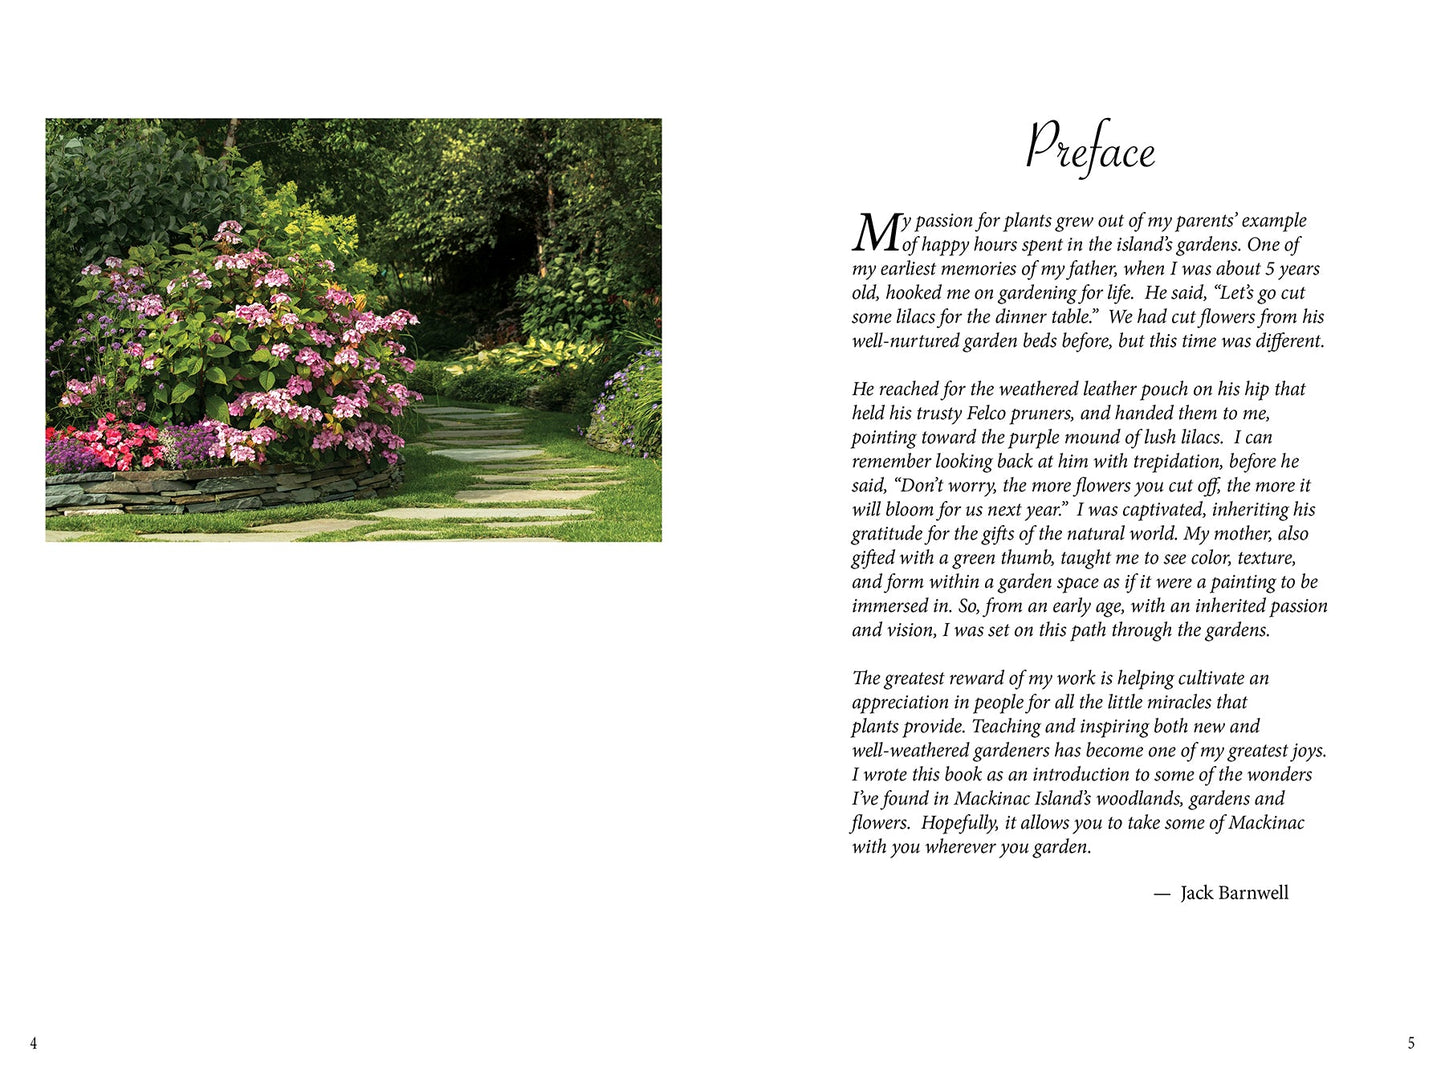 An Introduction to the Gardens of Mackinac Island Book by Jack Barnwell and Jennifer Wohletz.